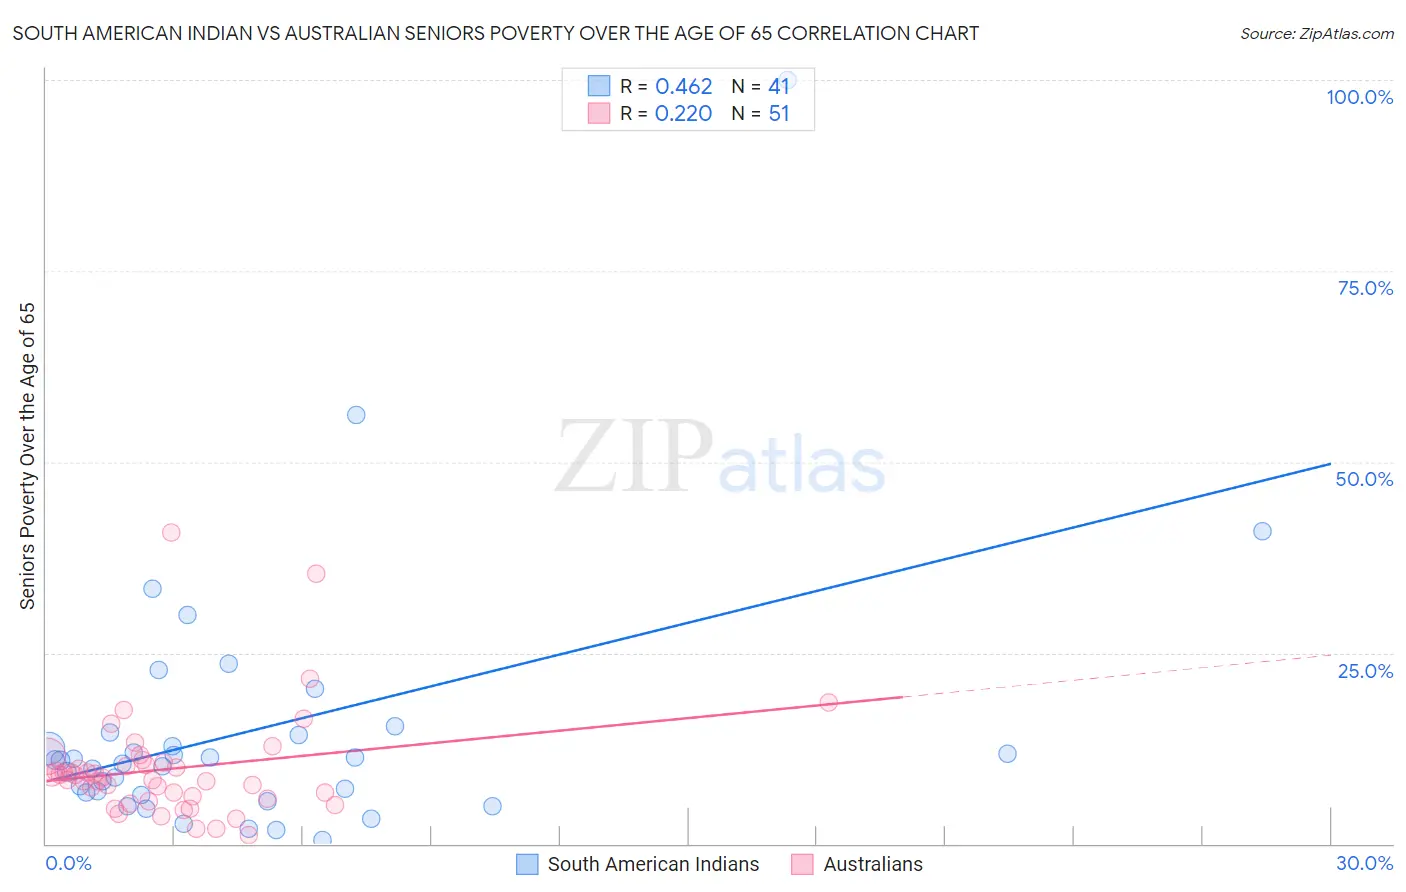 South American Indian vs Australian Seniors Poverty Over the Age of 65